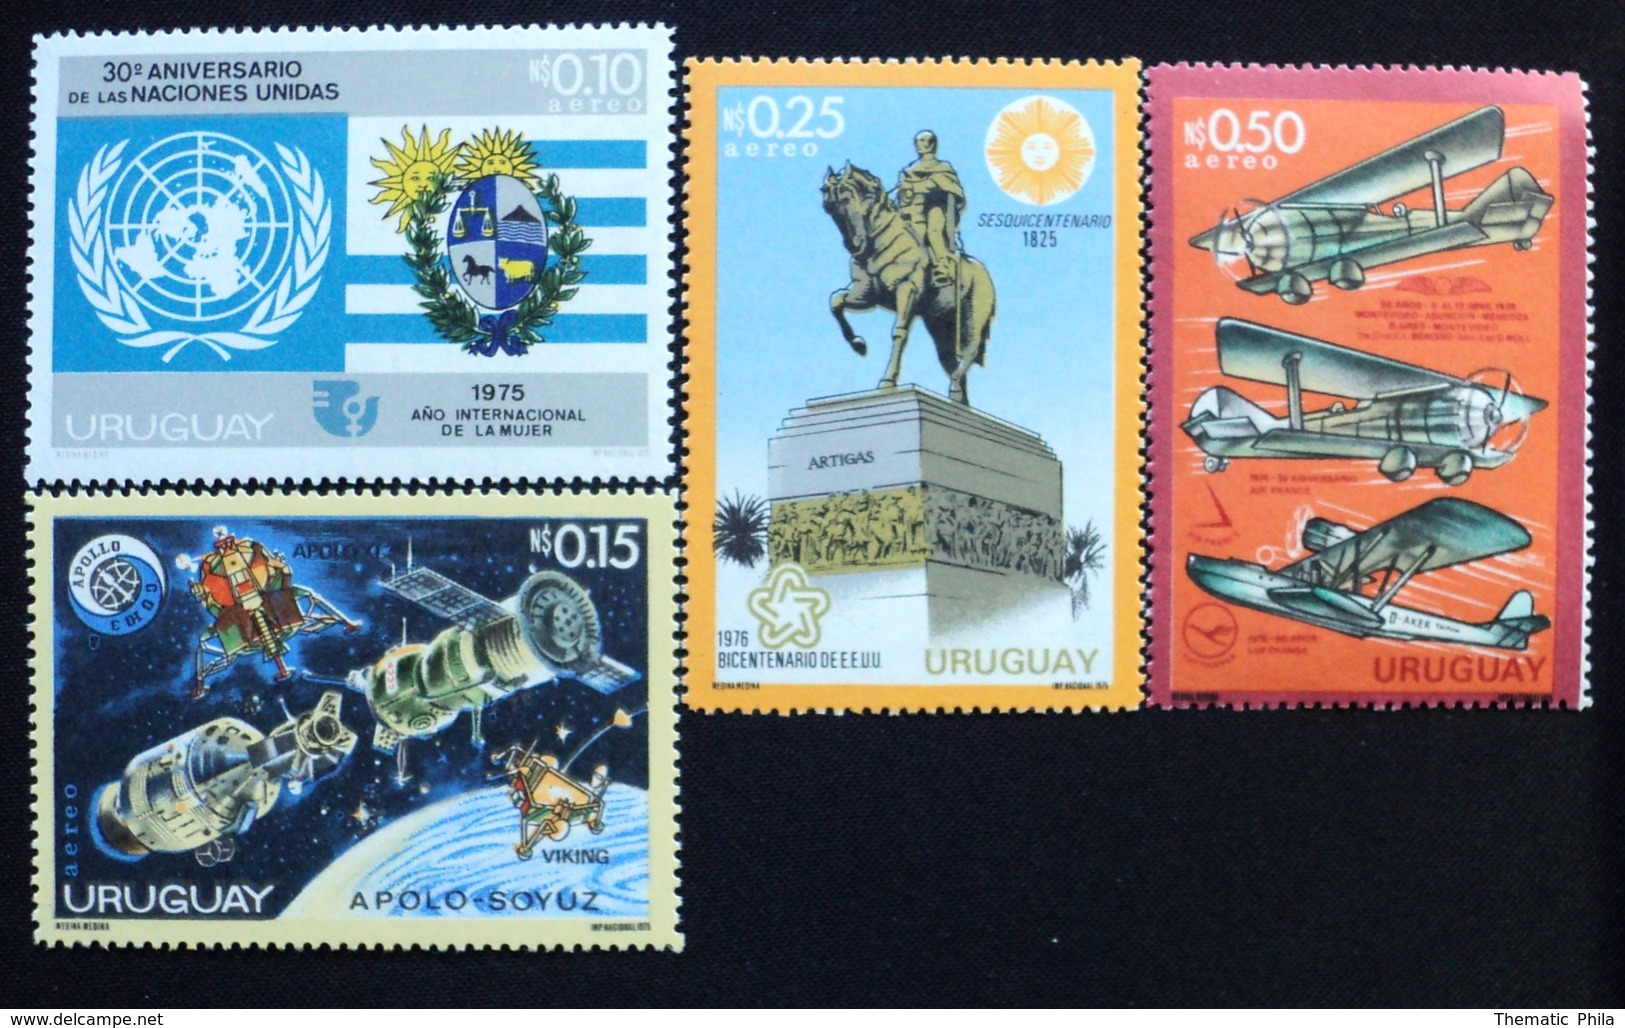 1975 URUGUAY Mnh AIR MAIL Yv A398/401 Events 30 Years ONU - Anée De La Femme Women's Day - Apollo Space Horse Planes - Uruguay